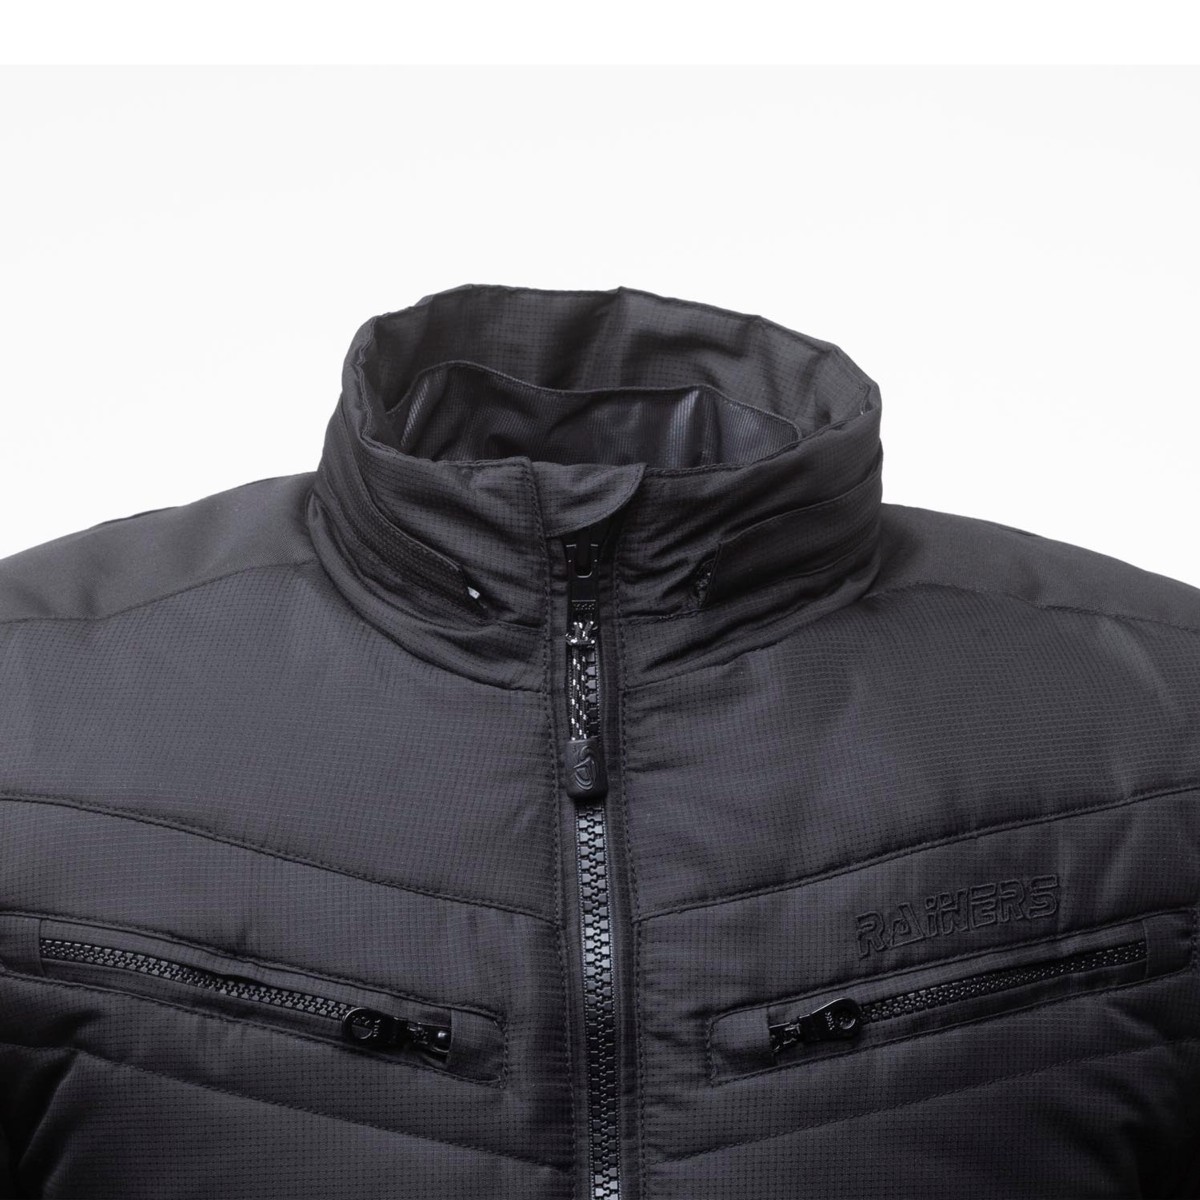 Chaqueta RAINERS DYLAN NEGRA INVIERNO Impermeable 2